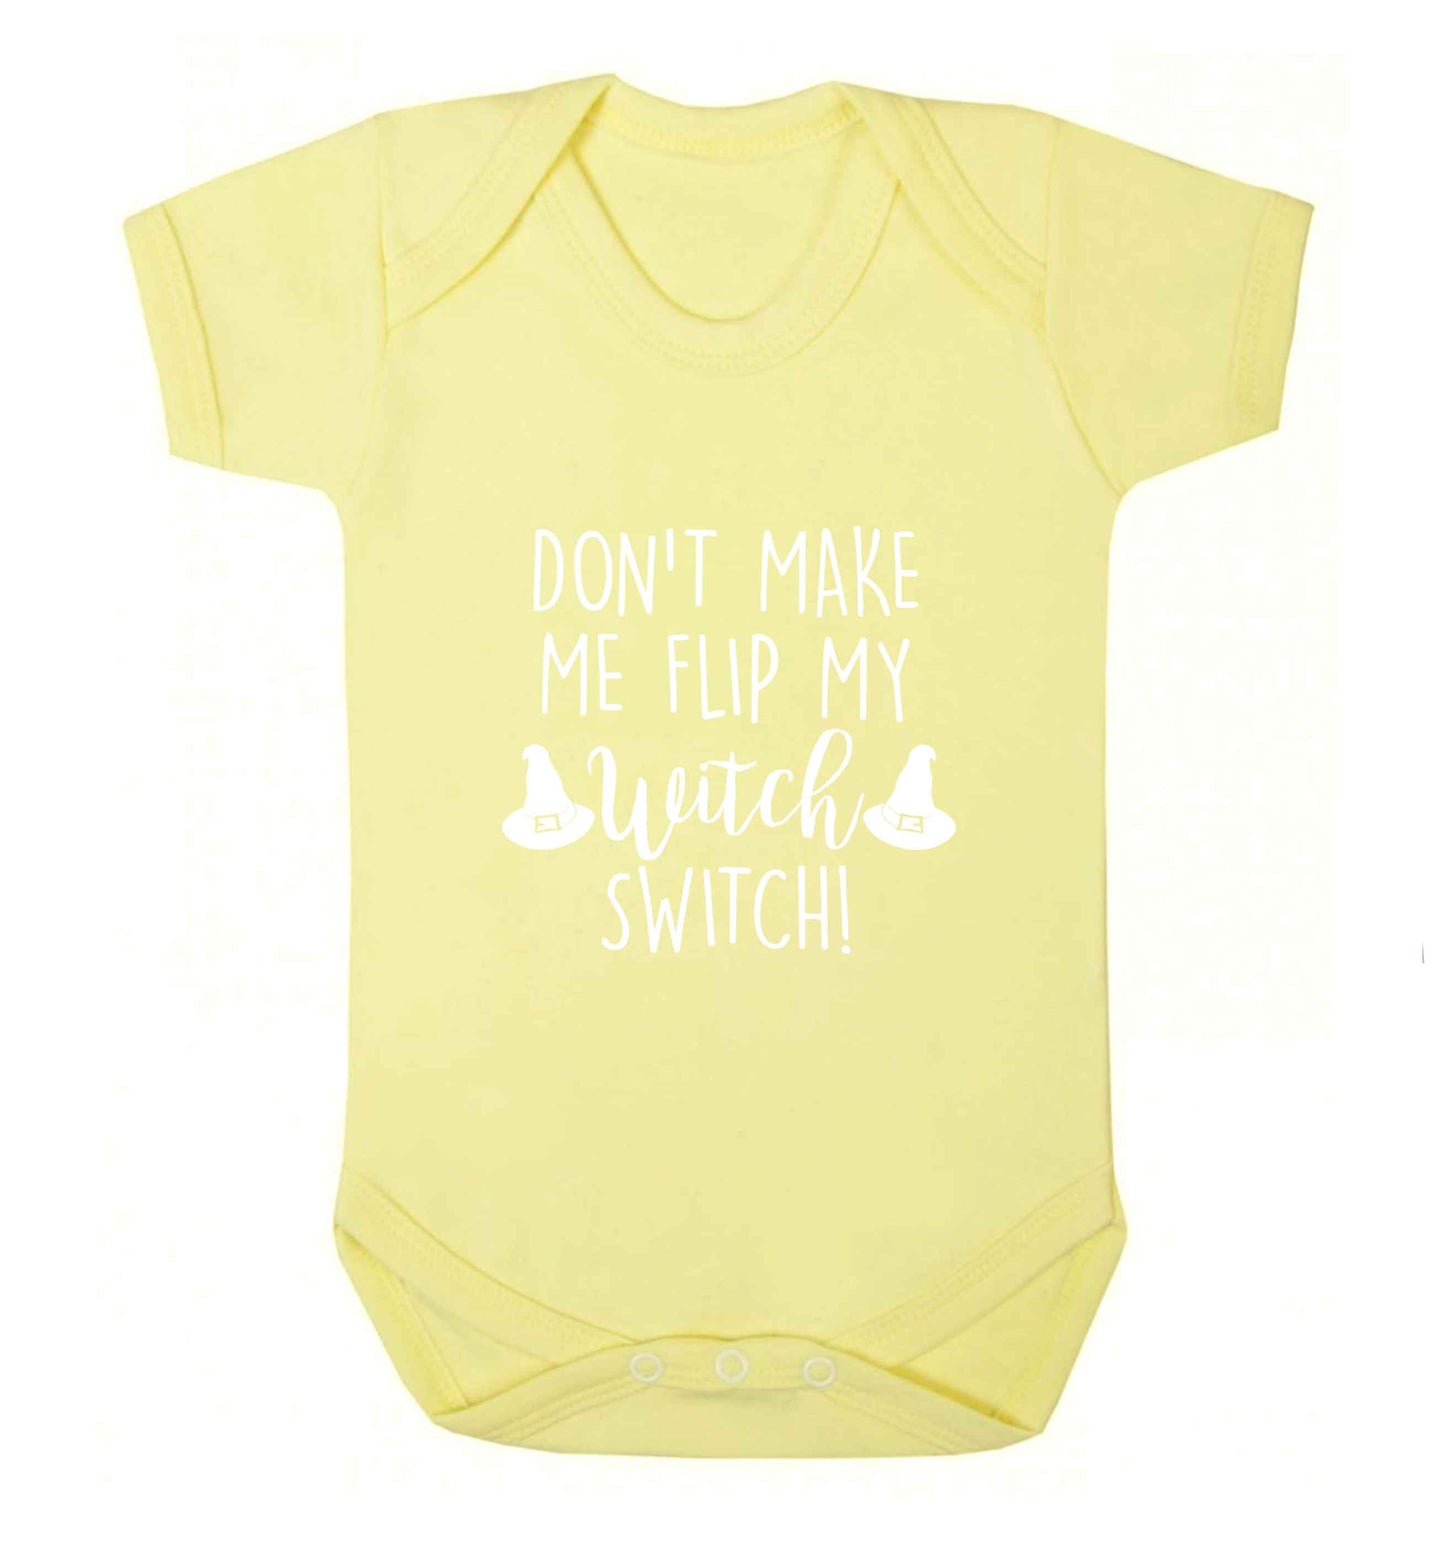 Don't make me flip my witch switch baby vest pale yellow 18-24 months